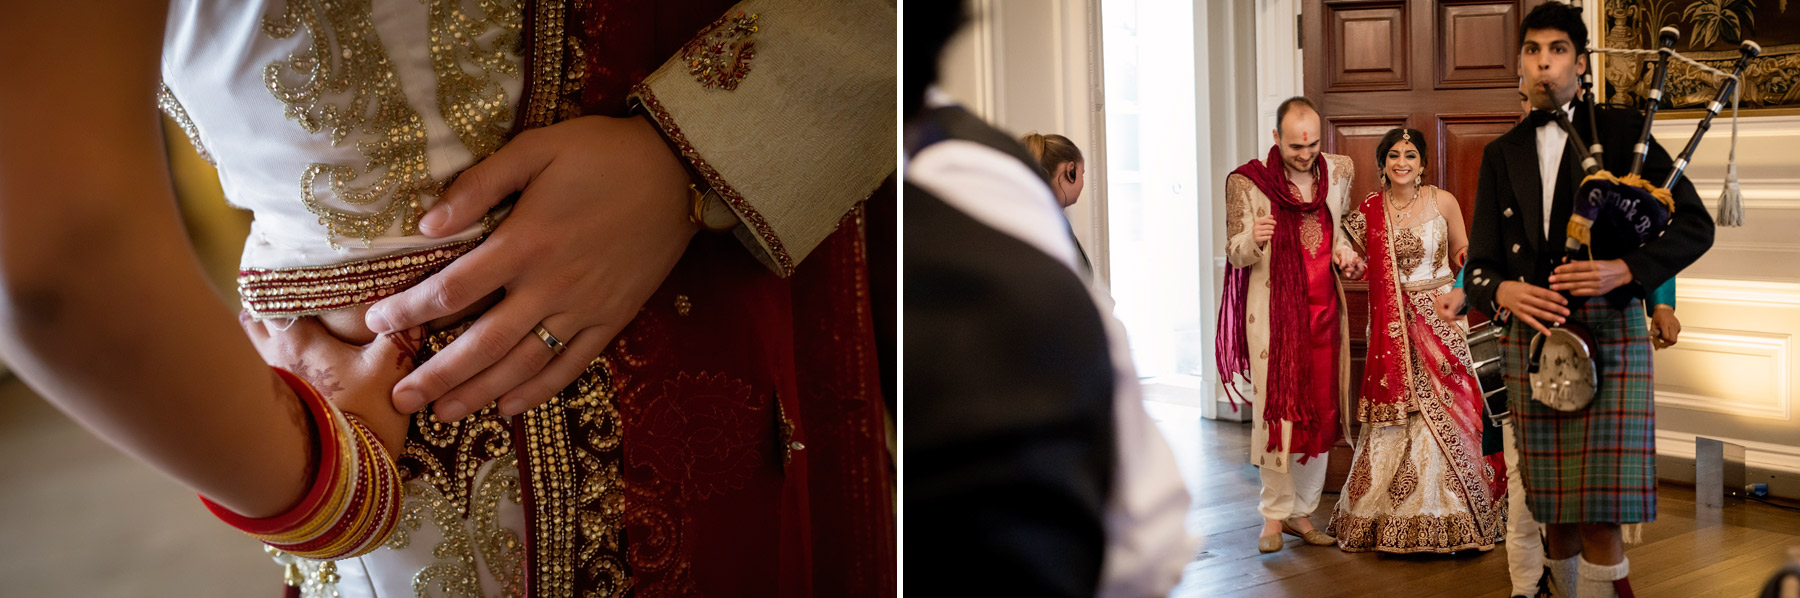 bride and groom gets piped in at hopetoun house scotland